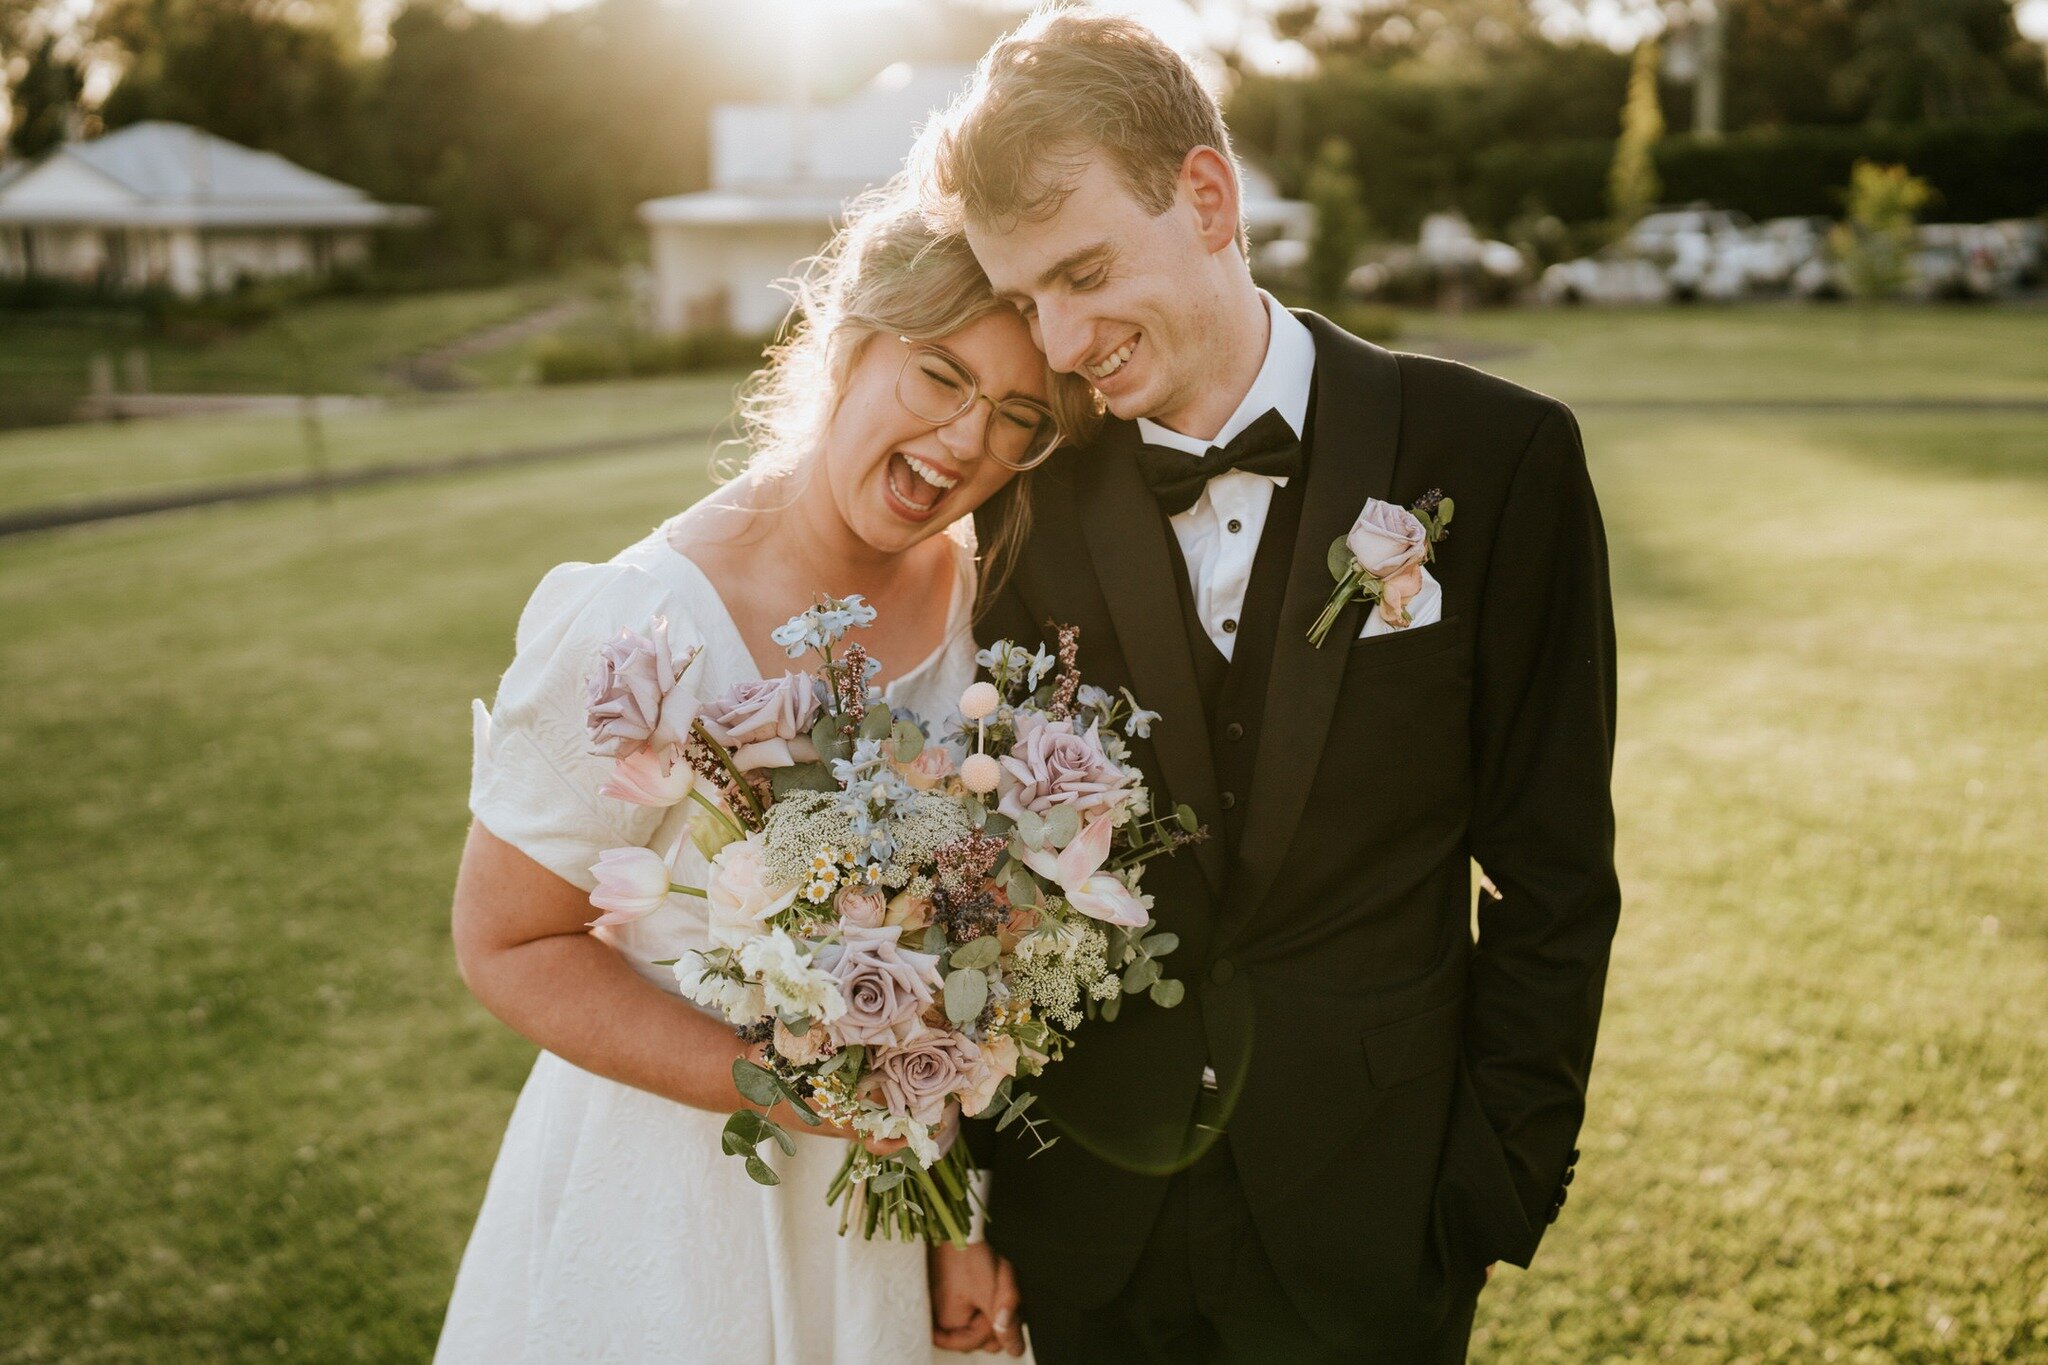 Chelsea &amp; Jordan - Two relaxed and fun souls. They handed me the reigns and said you do you. One of my all time favourite things to hear! This frame is from our sneaky break from the reception when the sun was setting. Super golden light started 